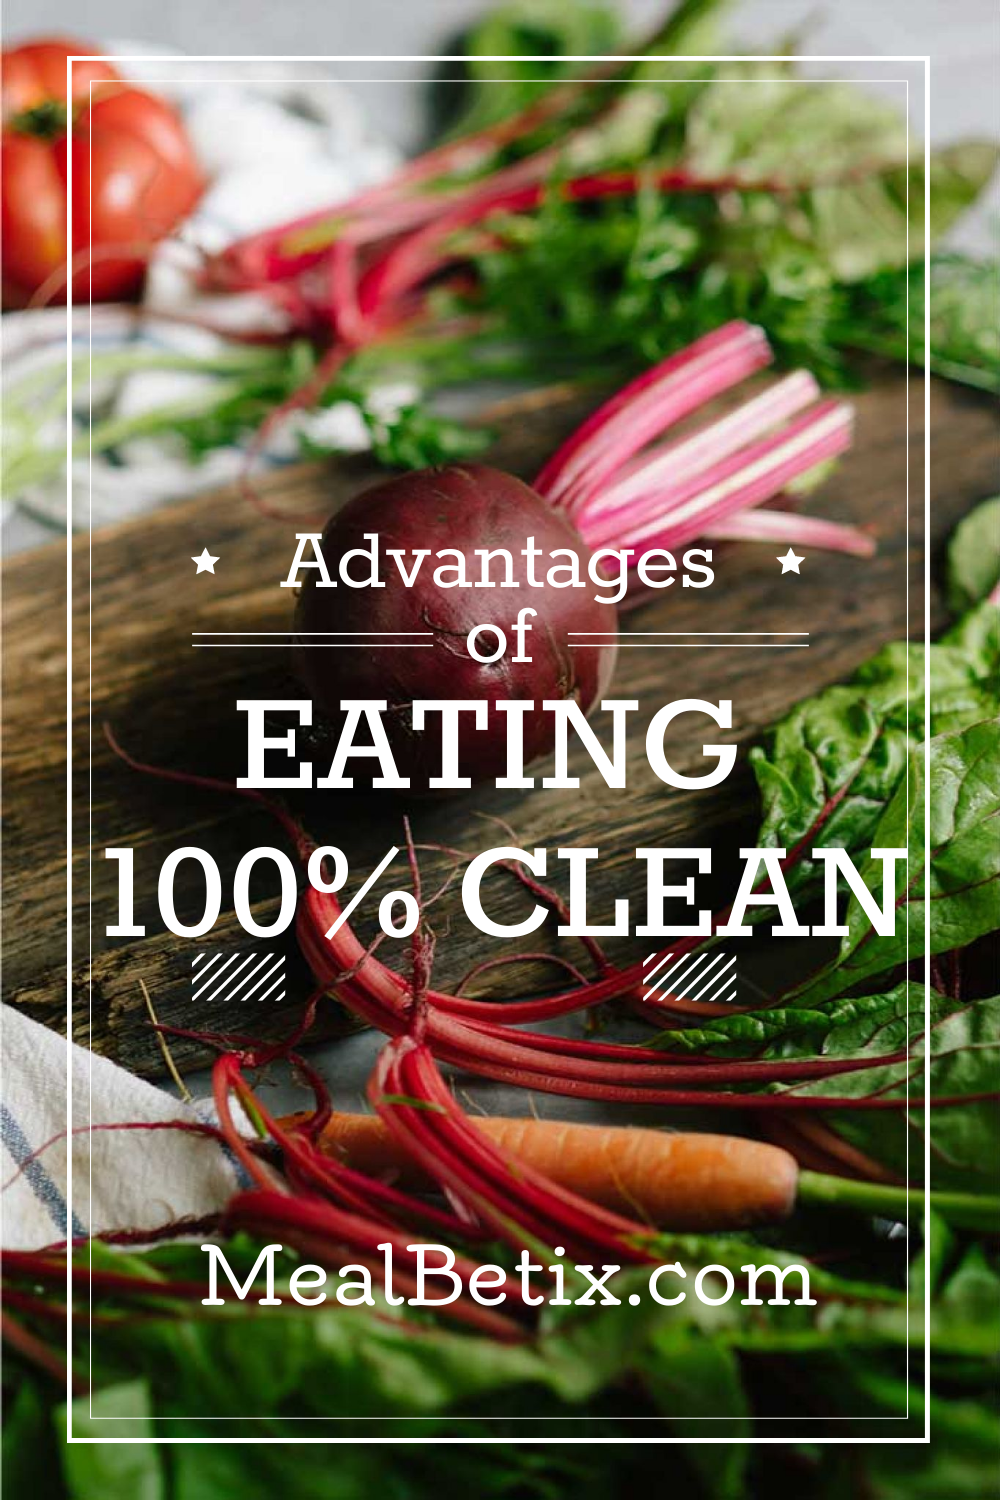 Benefits Of Eating Clean – The MealBetix Lifestyle Is The Last 100% Clean Food Lifestyle | High Protein | Low Carb | Gluten-Free | Vegan